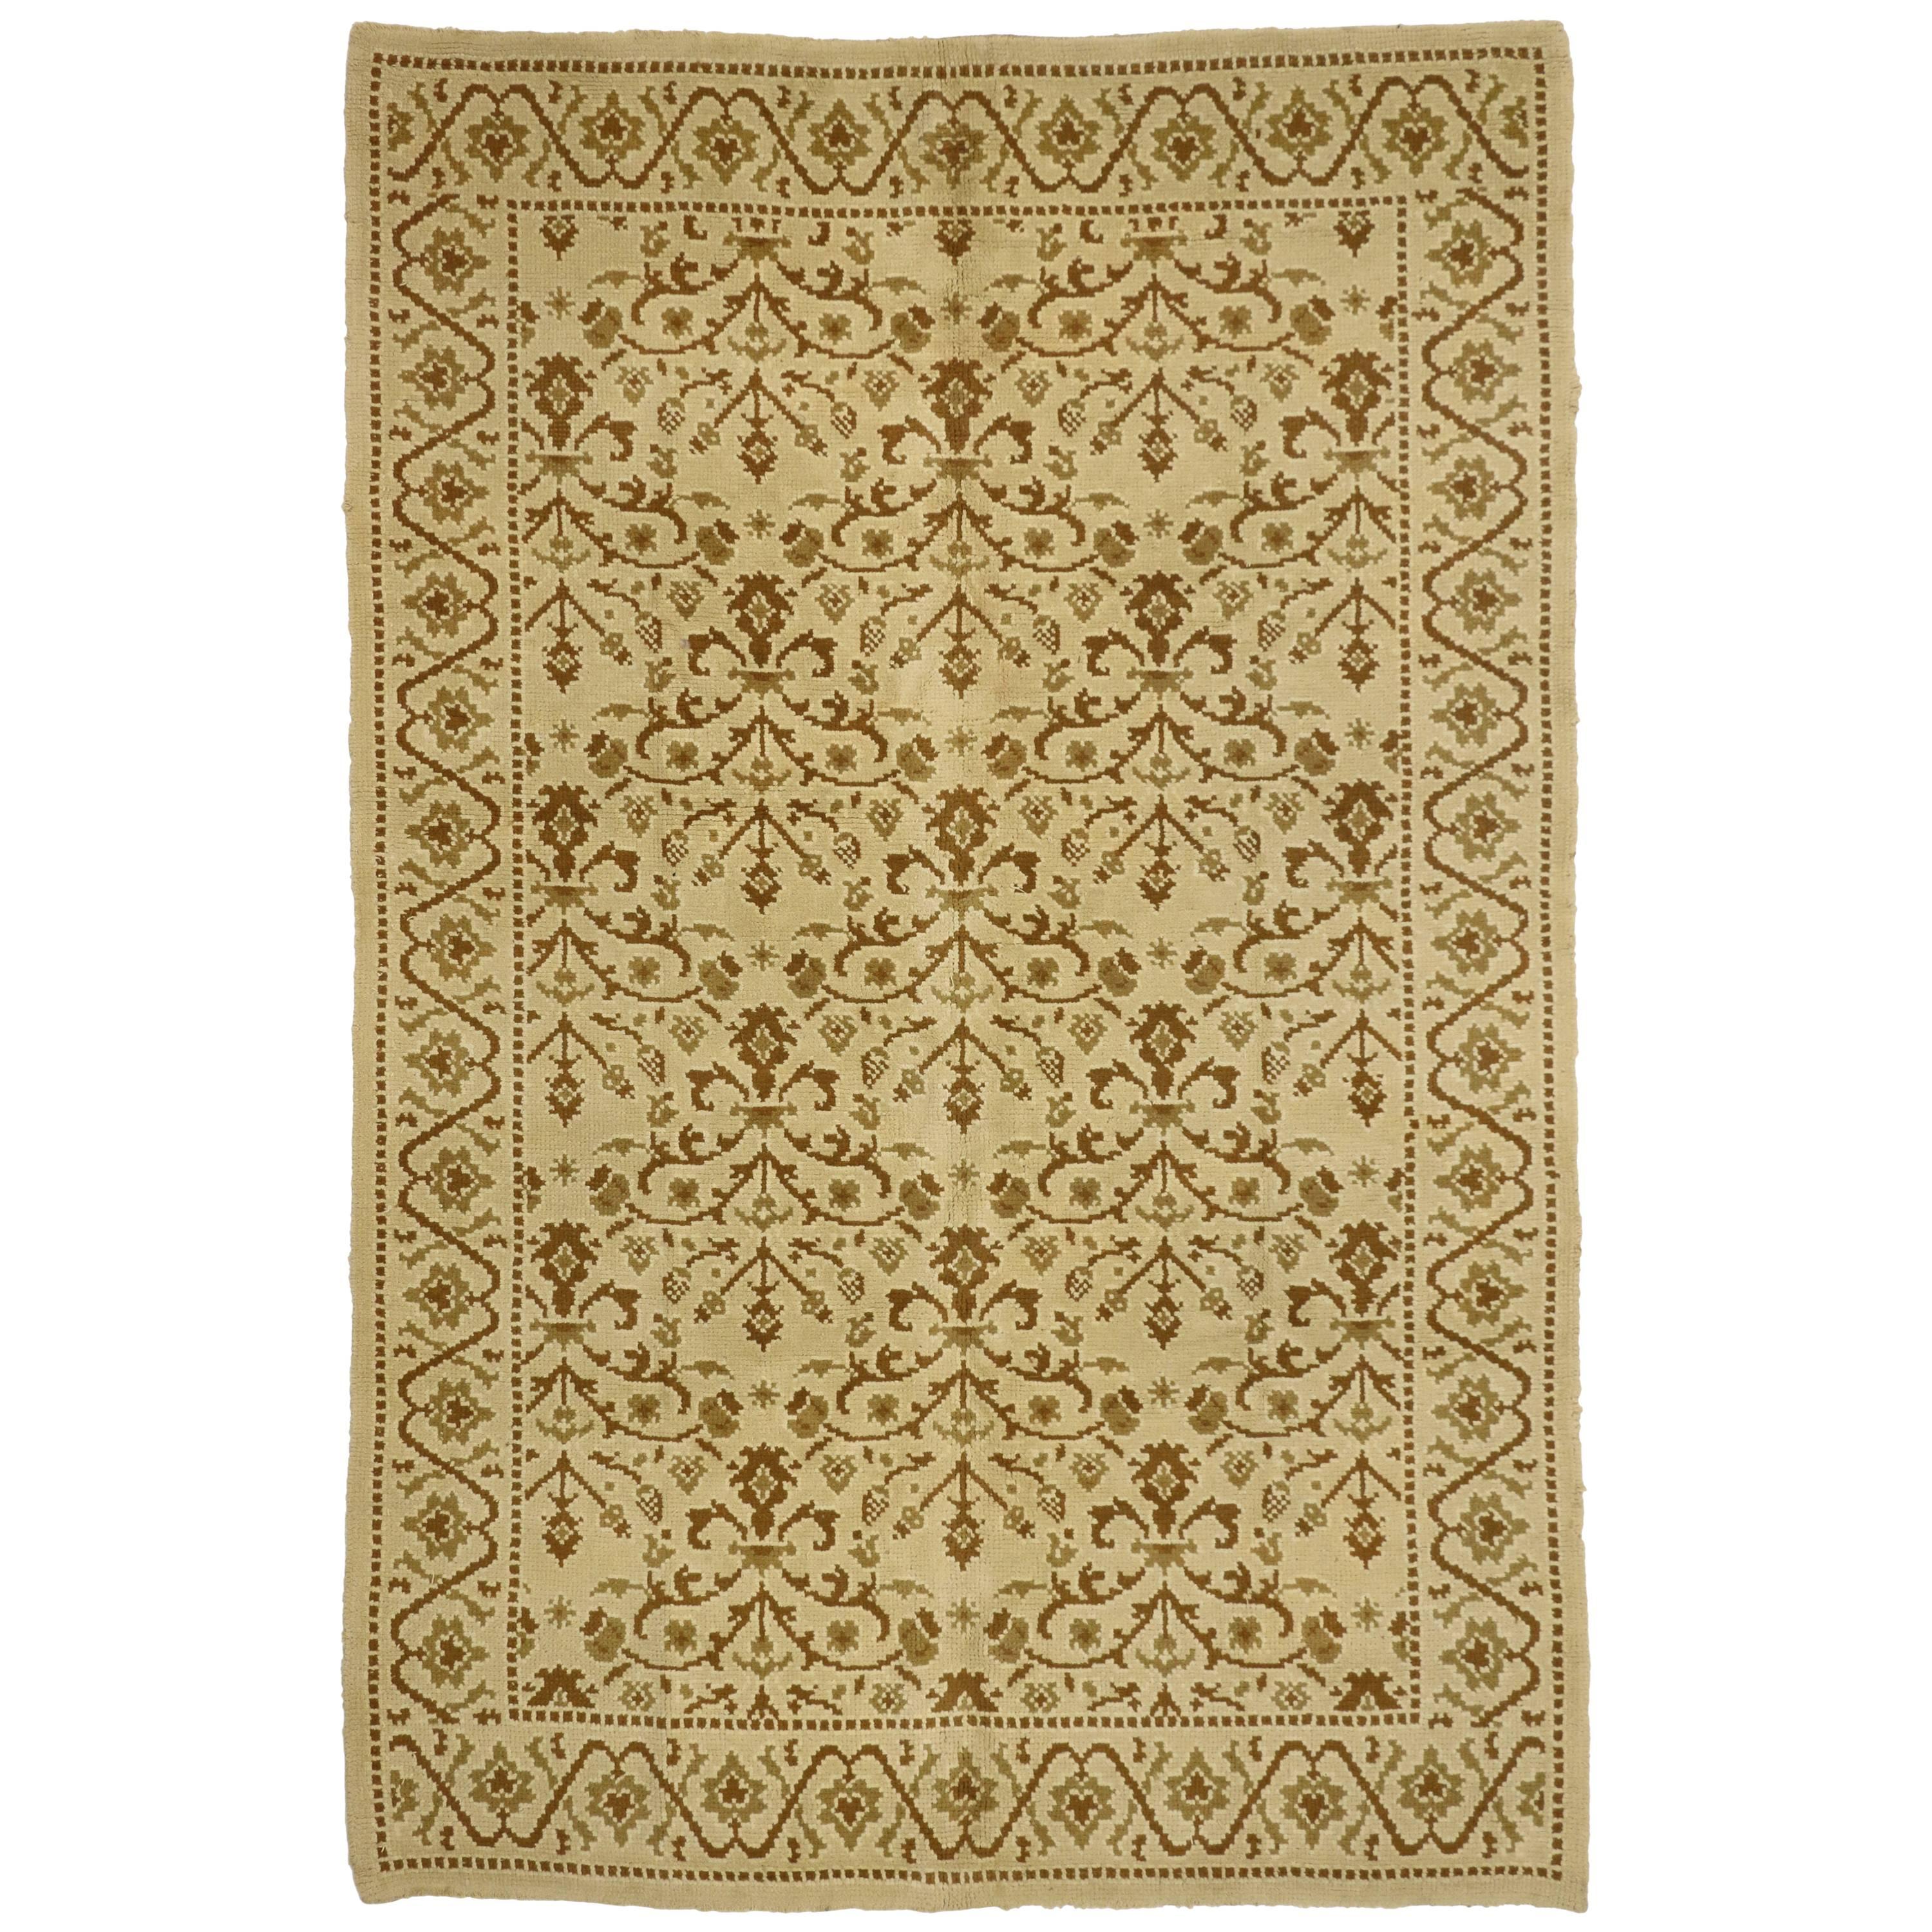 Vintage Spanish Rug with Transitional Style